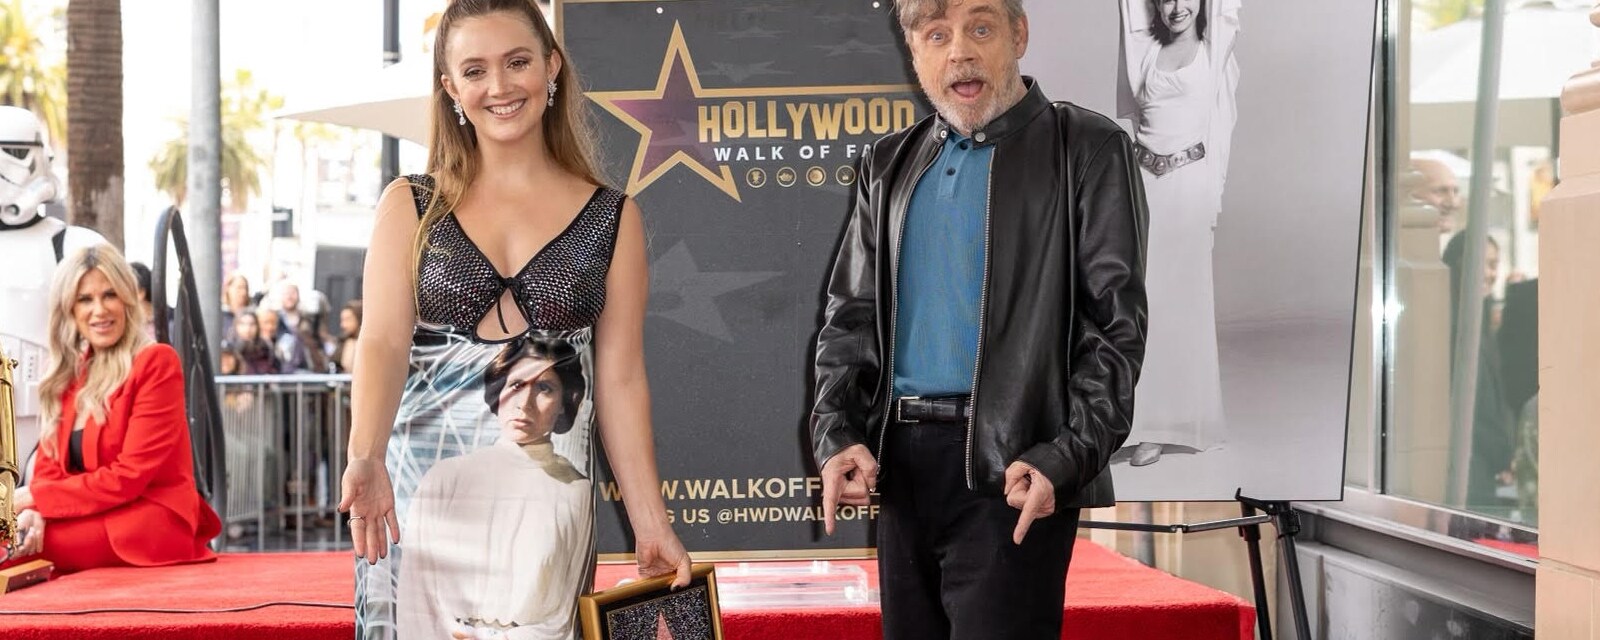 Billie Lourd and Mark Hamill unveil Carrie Fisher’s star on the Hollywood Walk of Fame